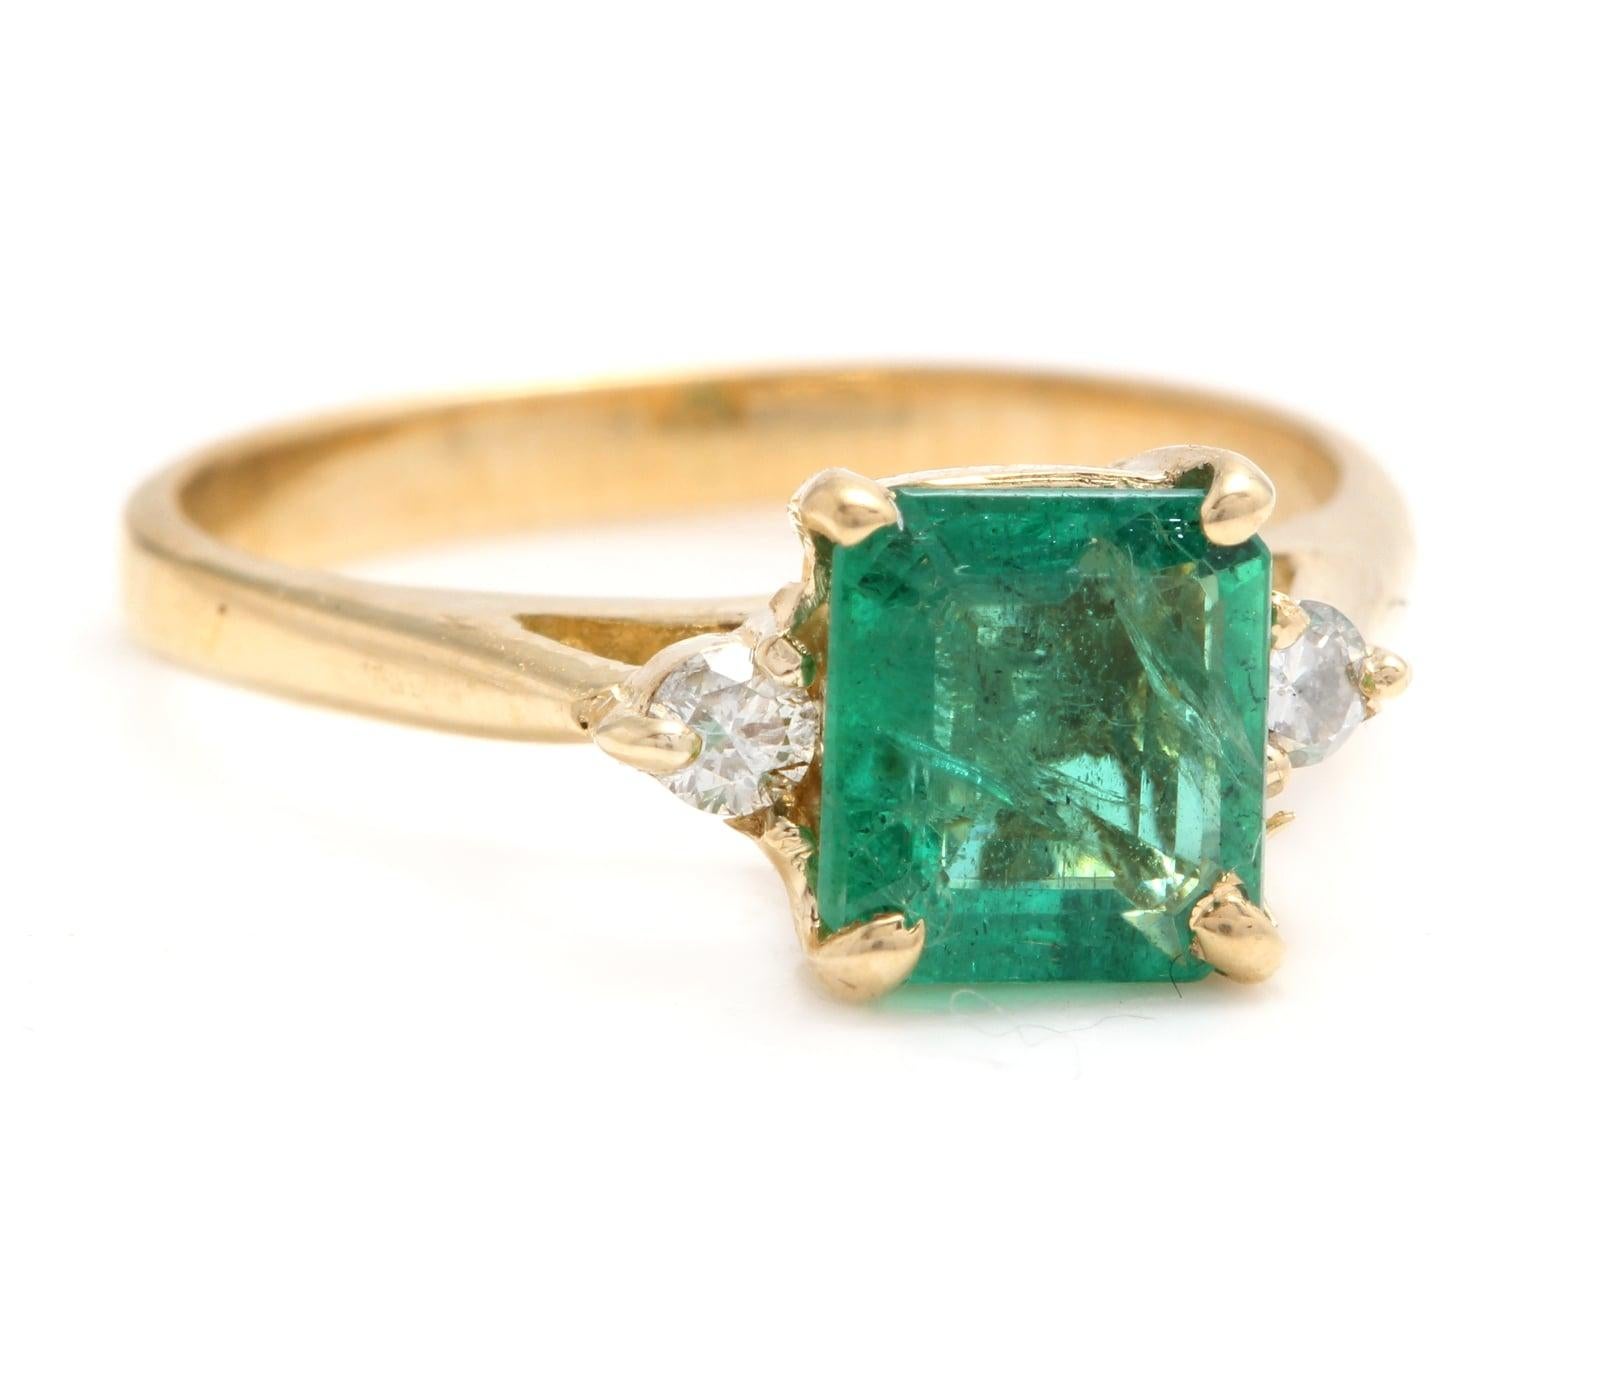 1.08 Carats Natural Emerald and Diamond 14K Solid Yellow Gold Ring

Total Natural Green Emerald Weight is: Approx. 1.00 Carats (transparent)

Emerald Measures: 6.30 x 5.80mm

Natural Round Diamonds Weight: 0.08 Carats (color G-H / Clarity